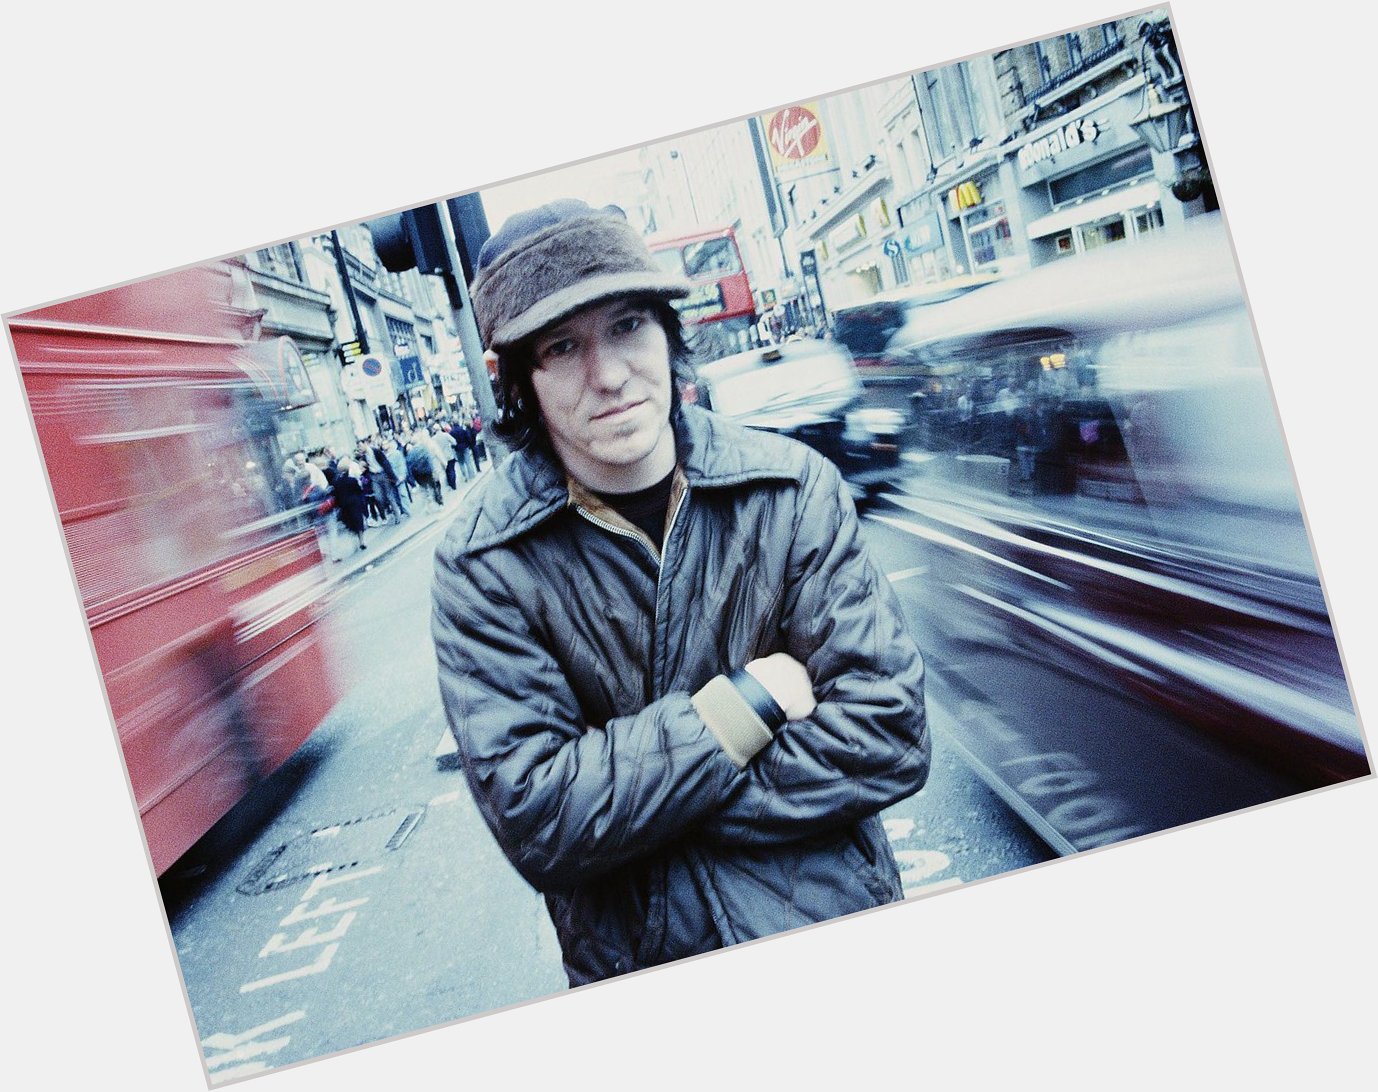 Happy birthday Elliott Smith, who would have been 48 today. 